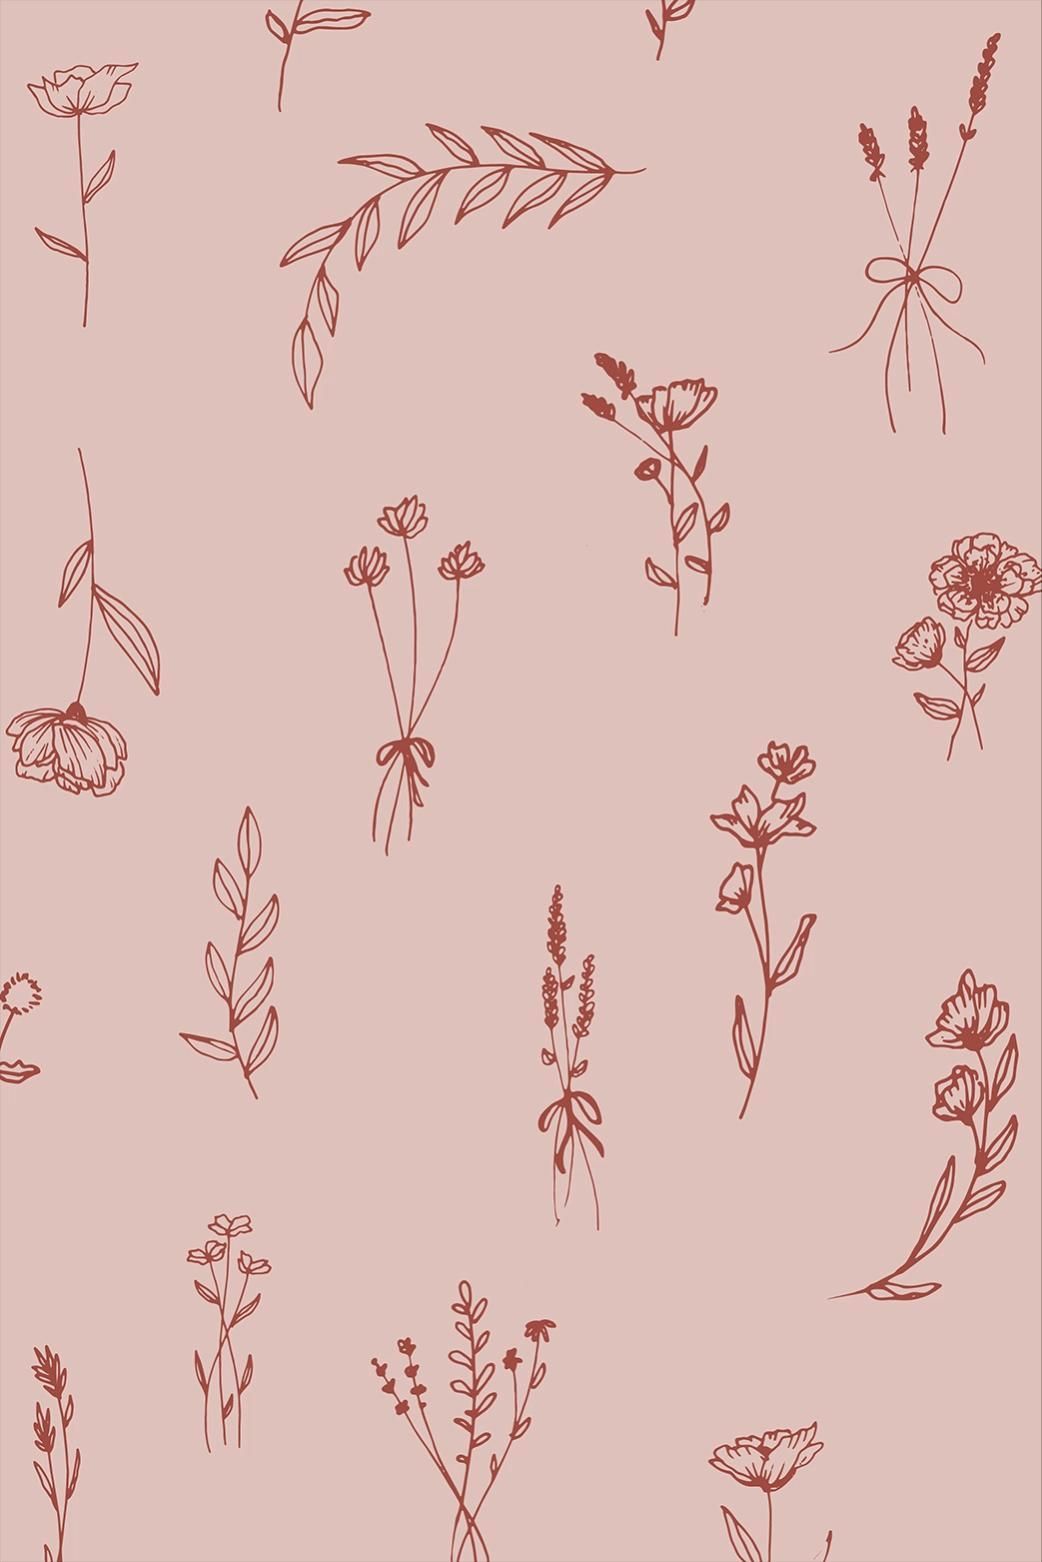 Modern Romantic | Minimal pink & red floral pattern - Modern Romantic | Minimal pink & red floral pattern -   17 beauty Background drawings ideas